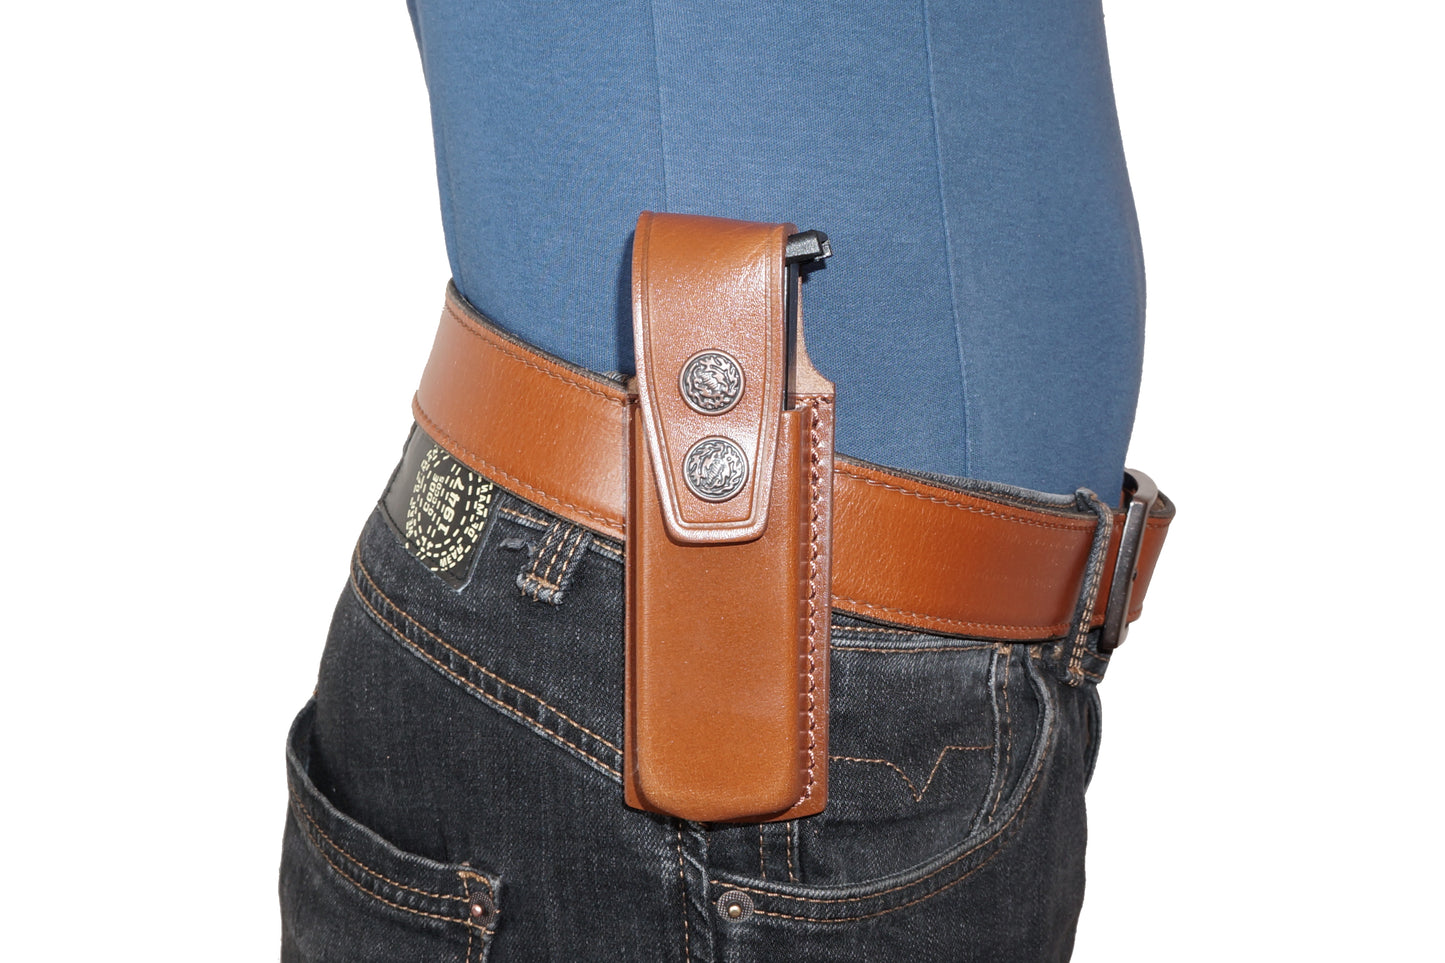 Holster KM001 Handmade Leather Single Magazine Pouch/Carrier/Case with Belt Clip for Colt 1911